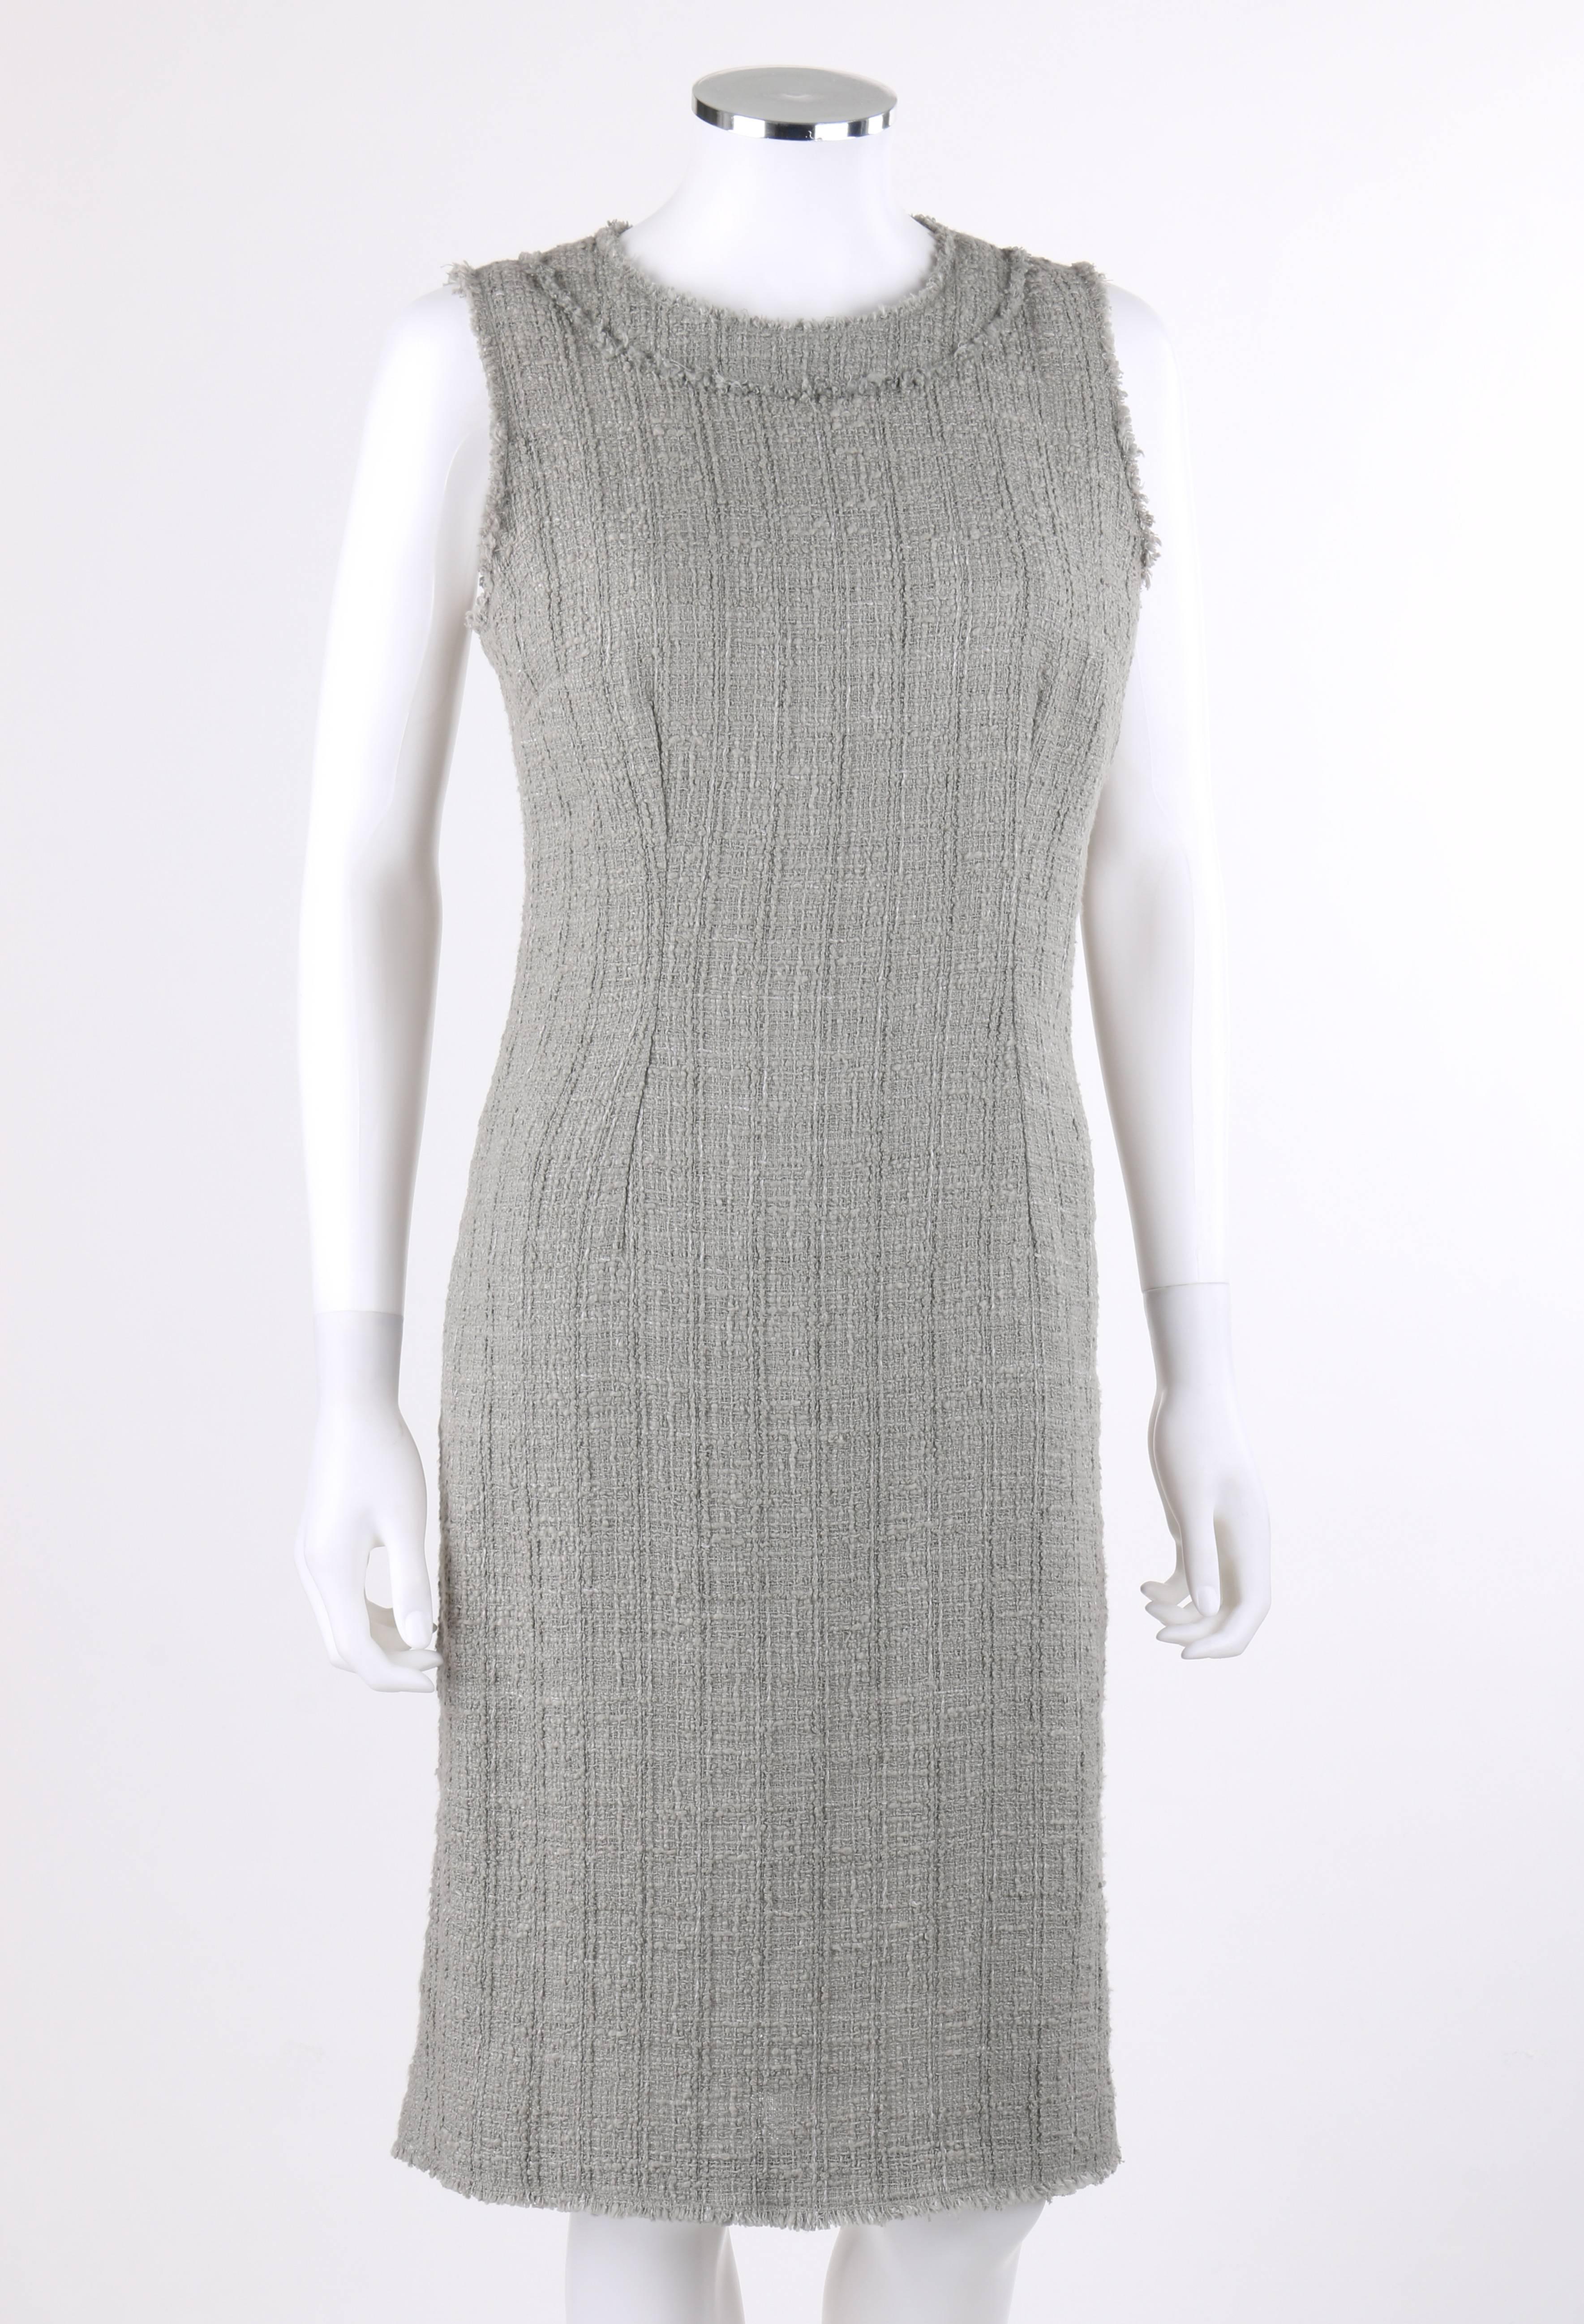 Dolce & Gabbana Autumn/Winter 2008 gray boucle tweed shift dress. Sleeveless shift style. Scoop neckline. Raw edge fringe detail along neckline, arm holes, and hem. Center back lapped zipper with hook and eye closure at top. Center back vent.